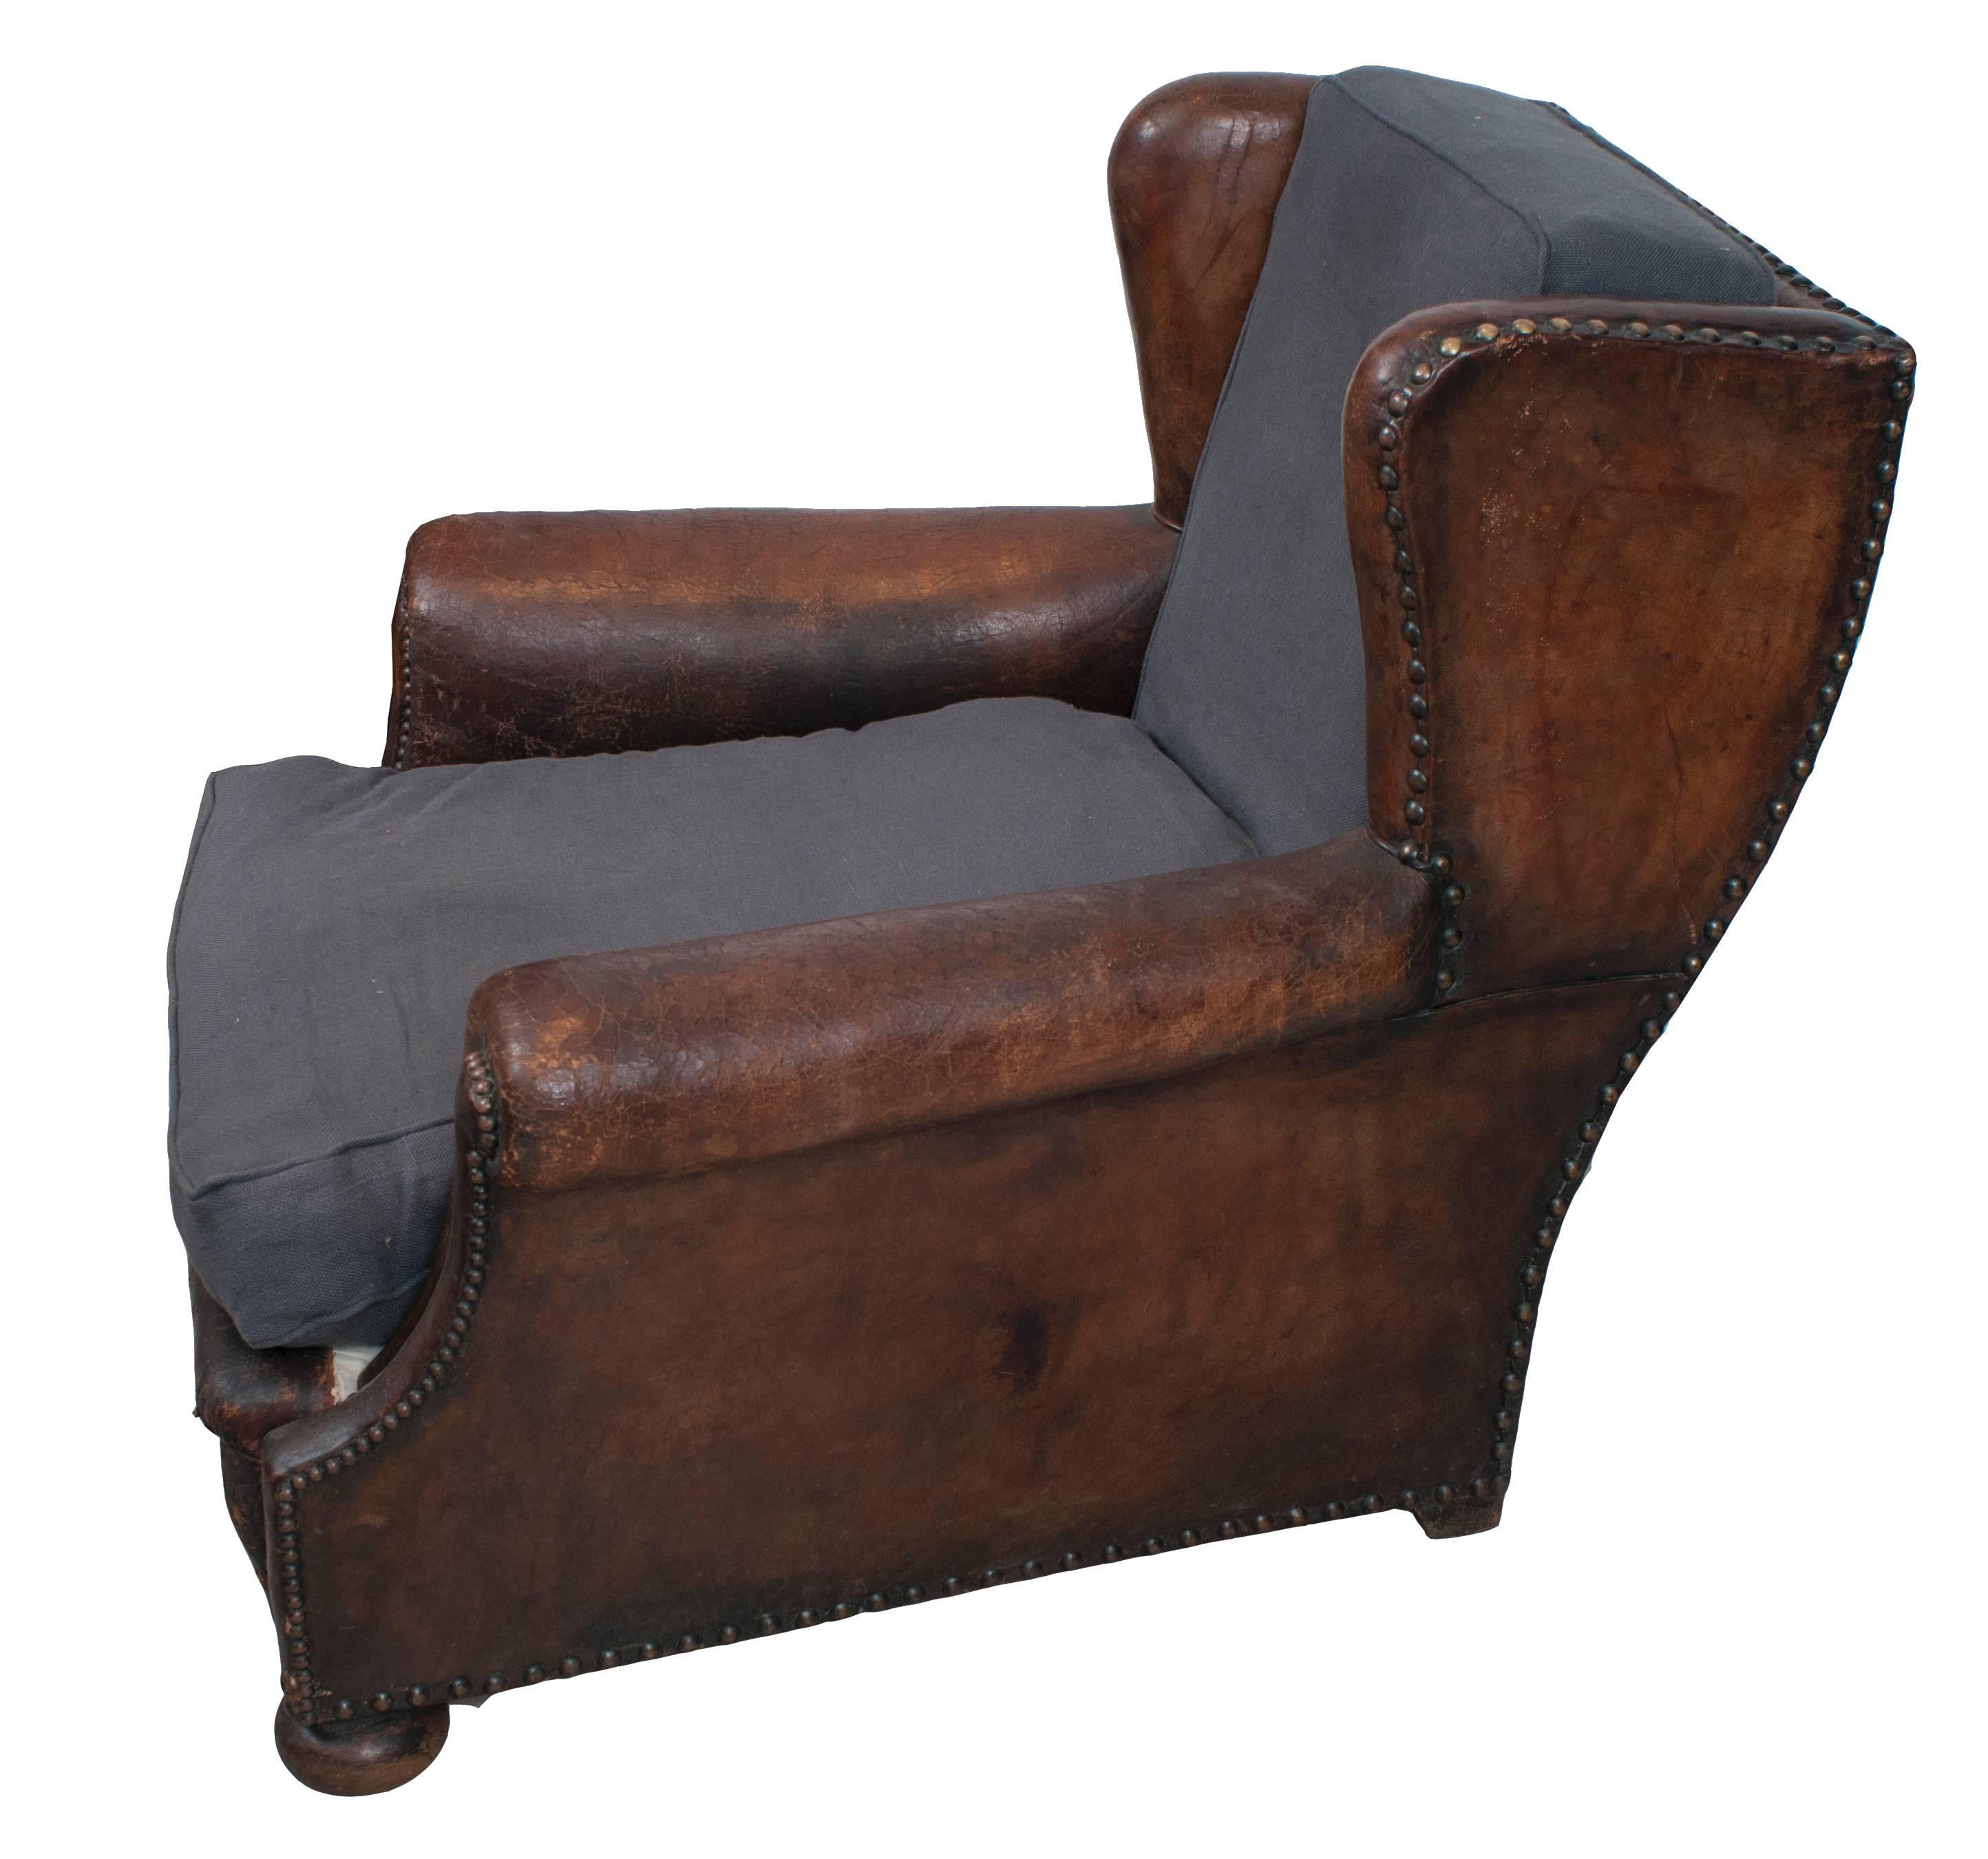 leather cushions for chairs